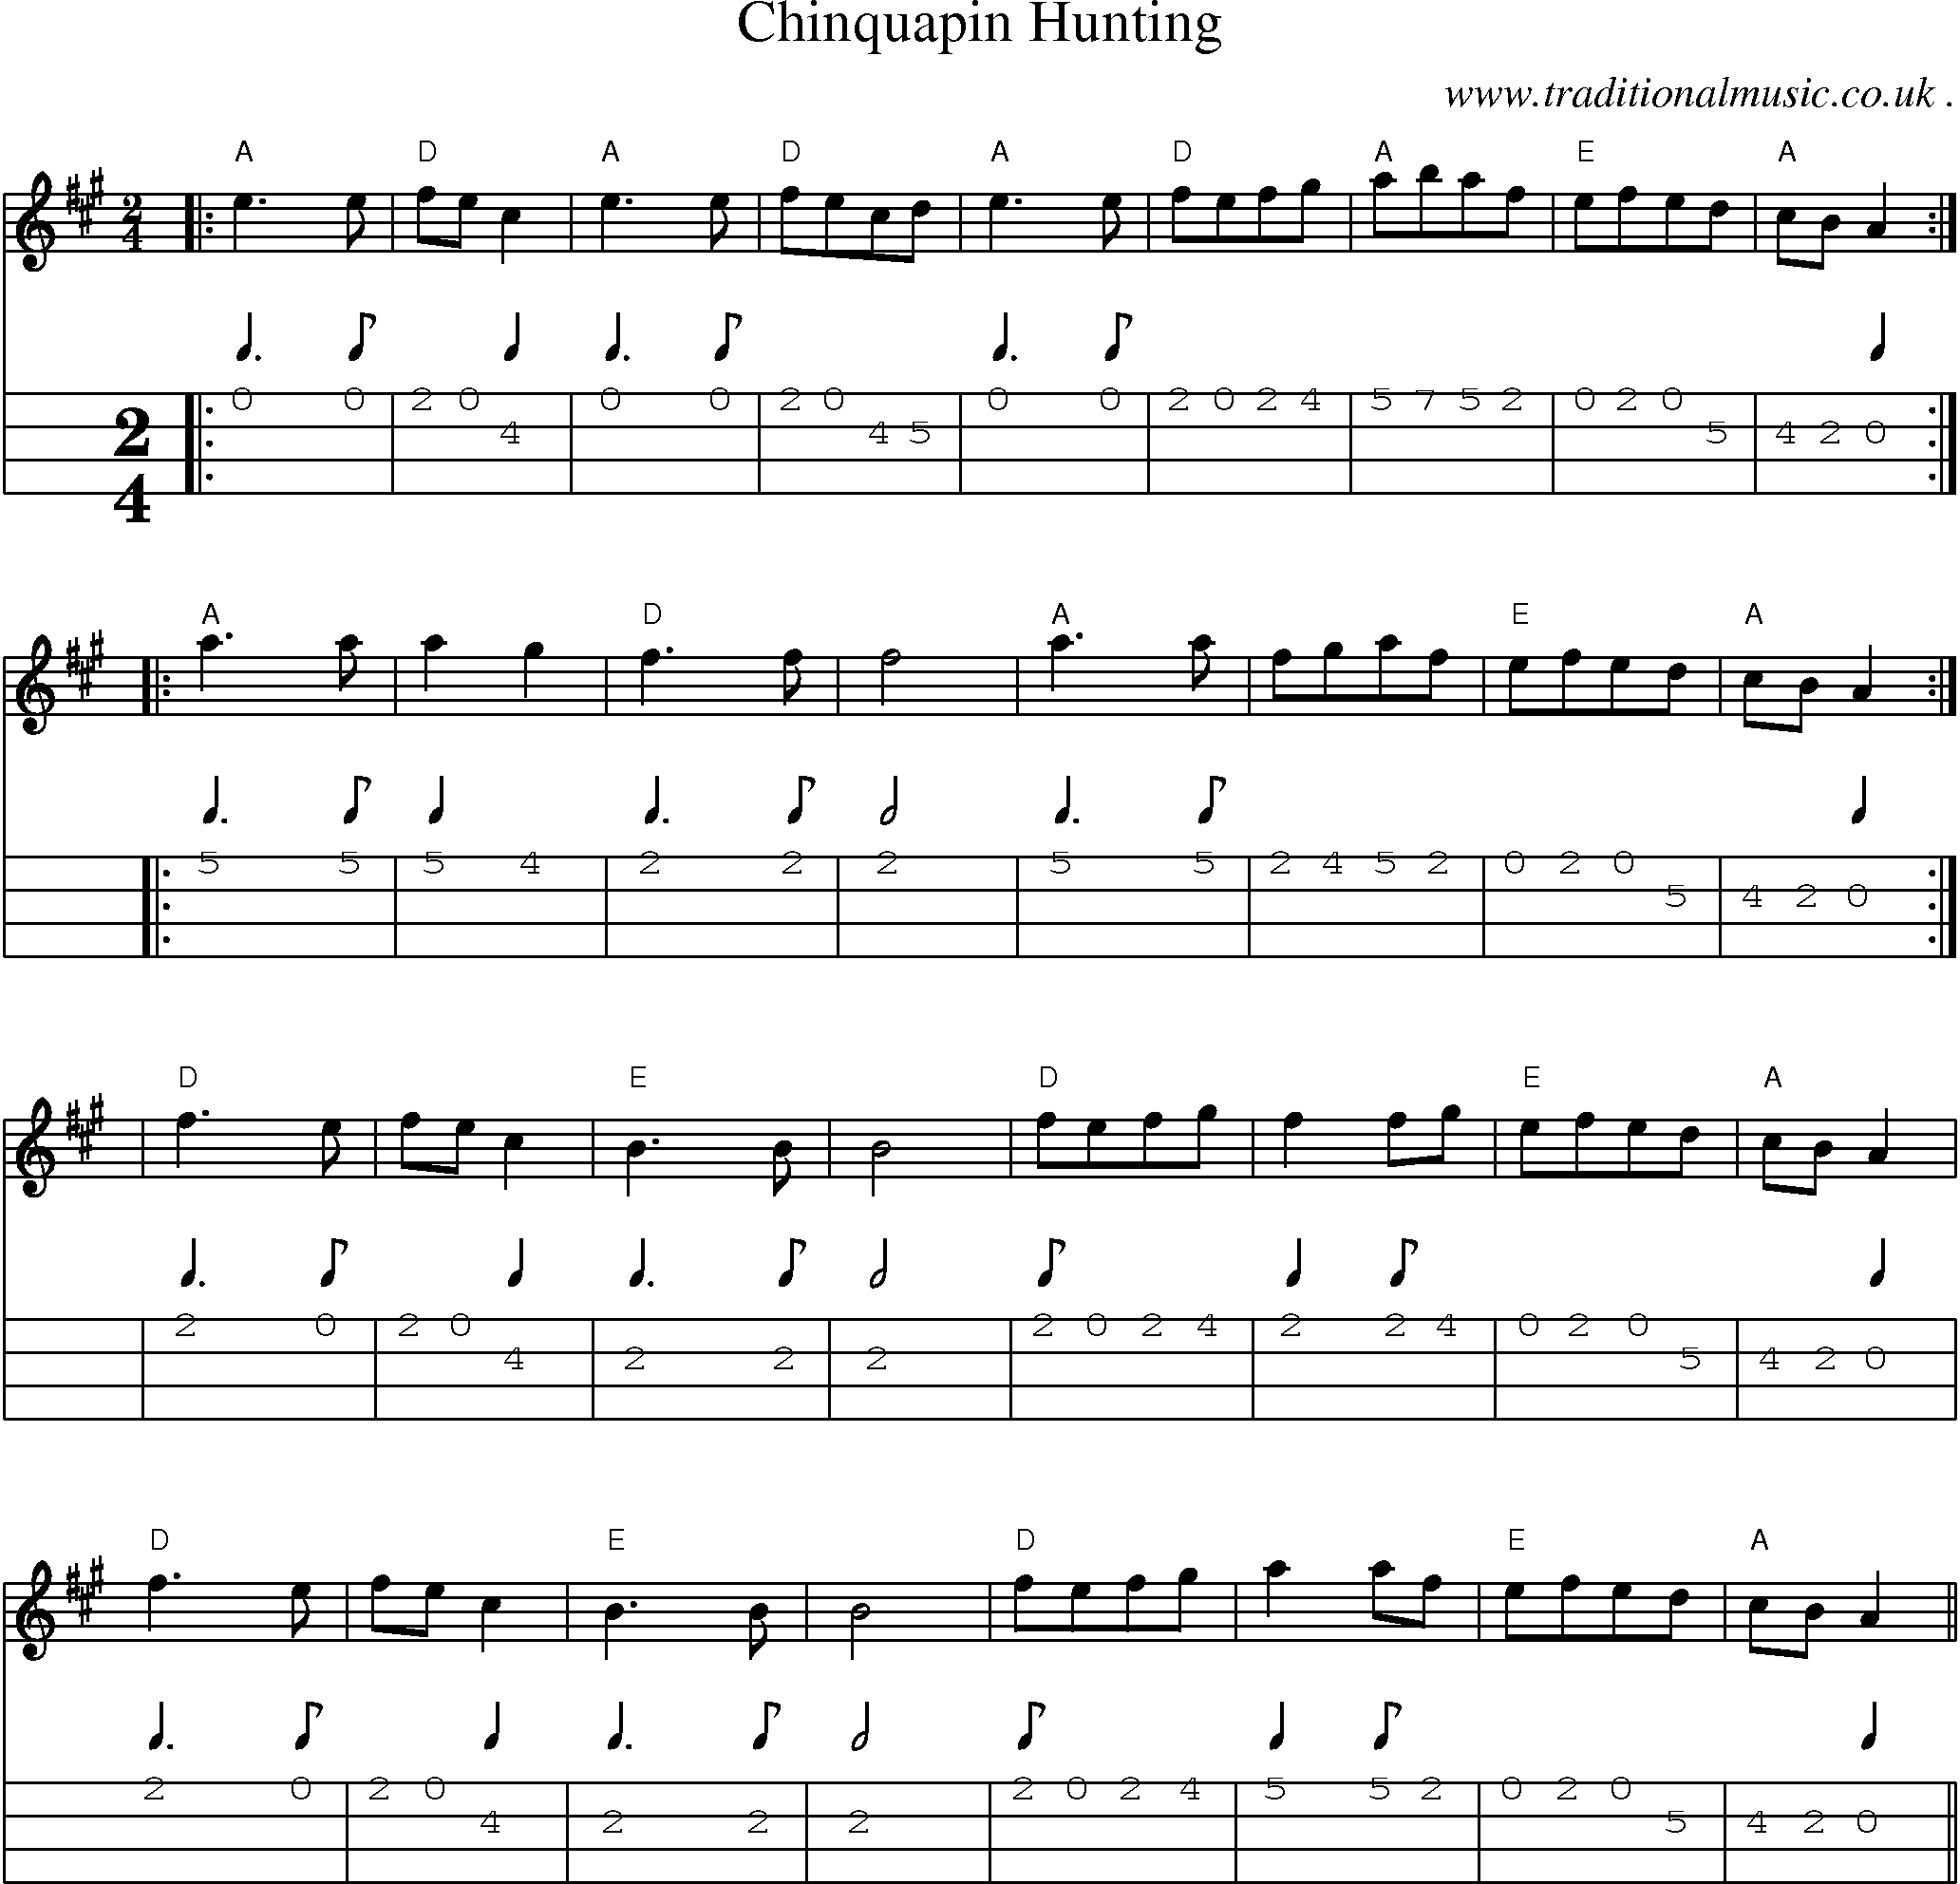 Music Score and Mandolin Tabs for Chinquapin Hunting